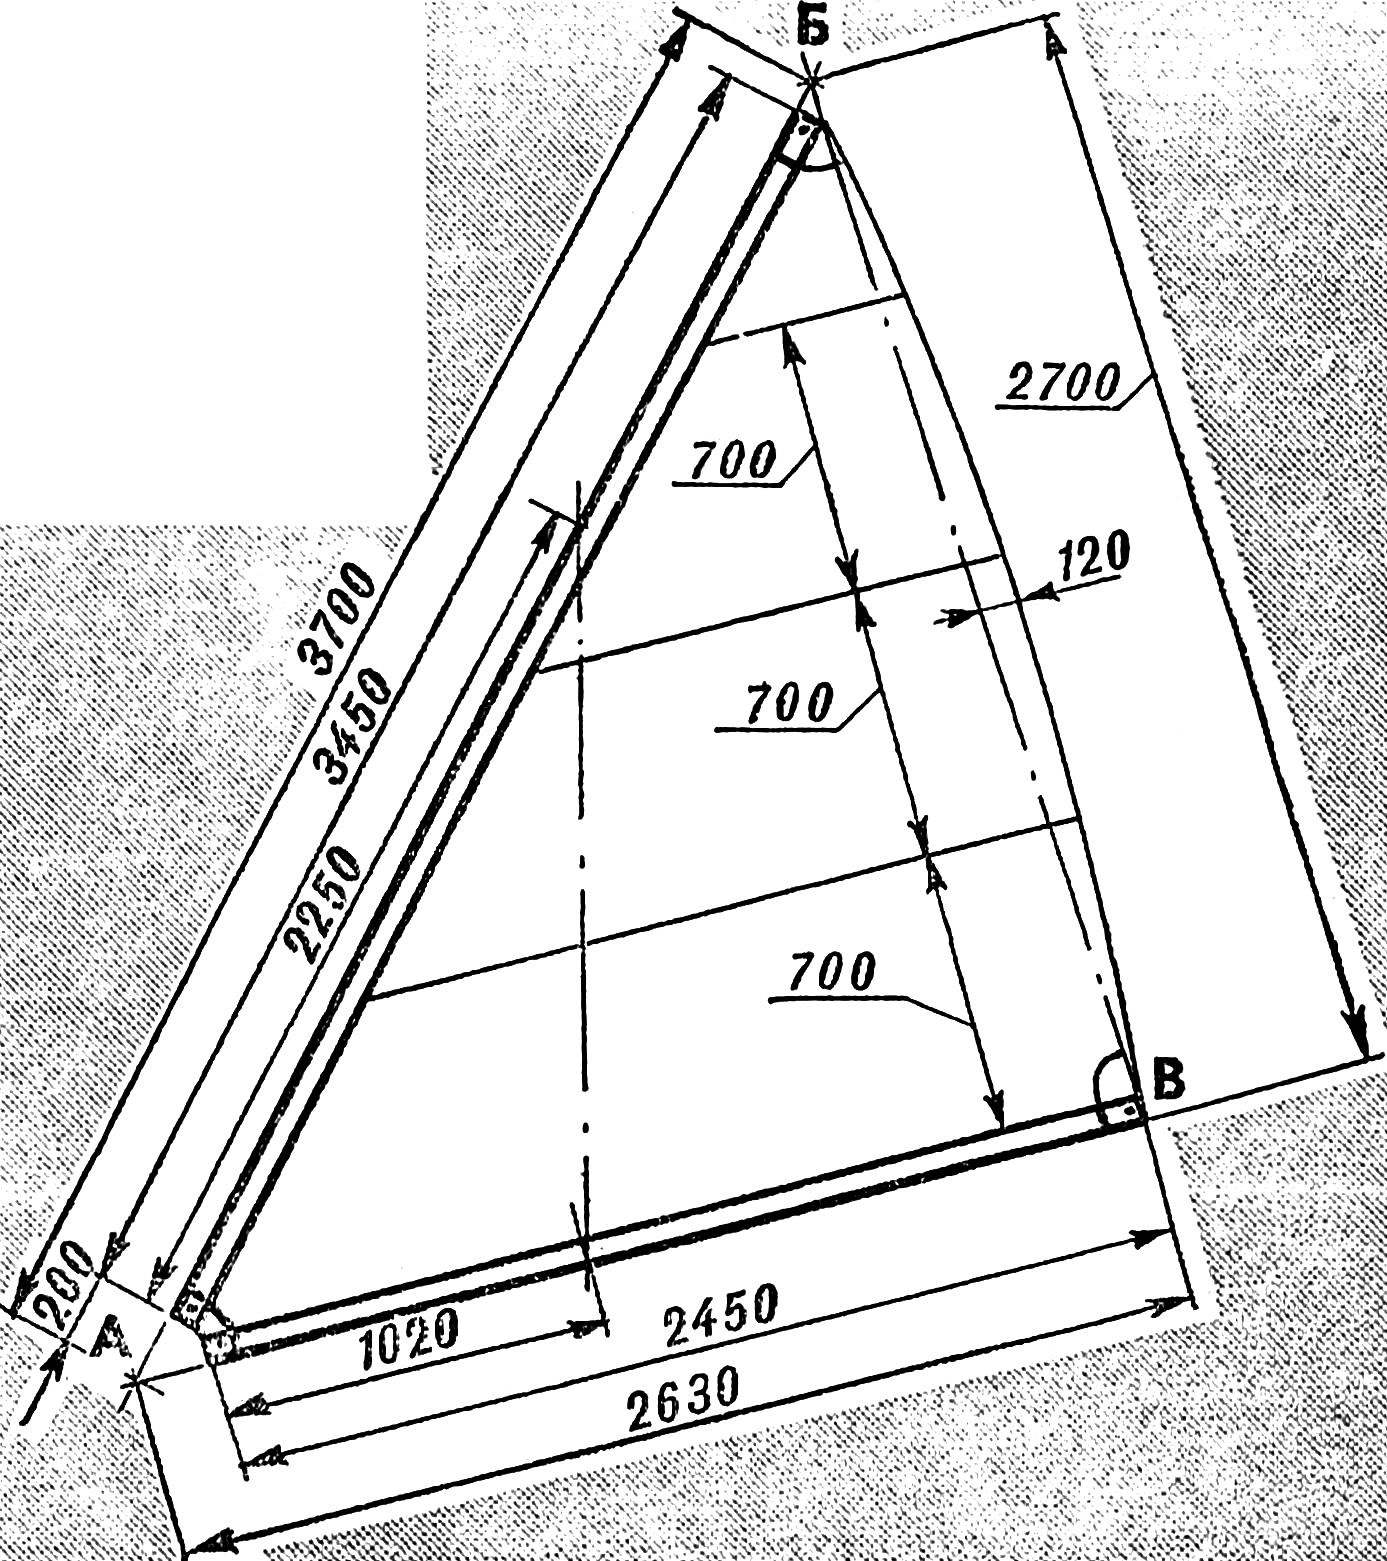 Geometrical scheme for the construction of the sail.